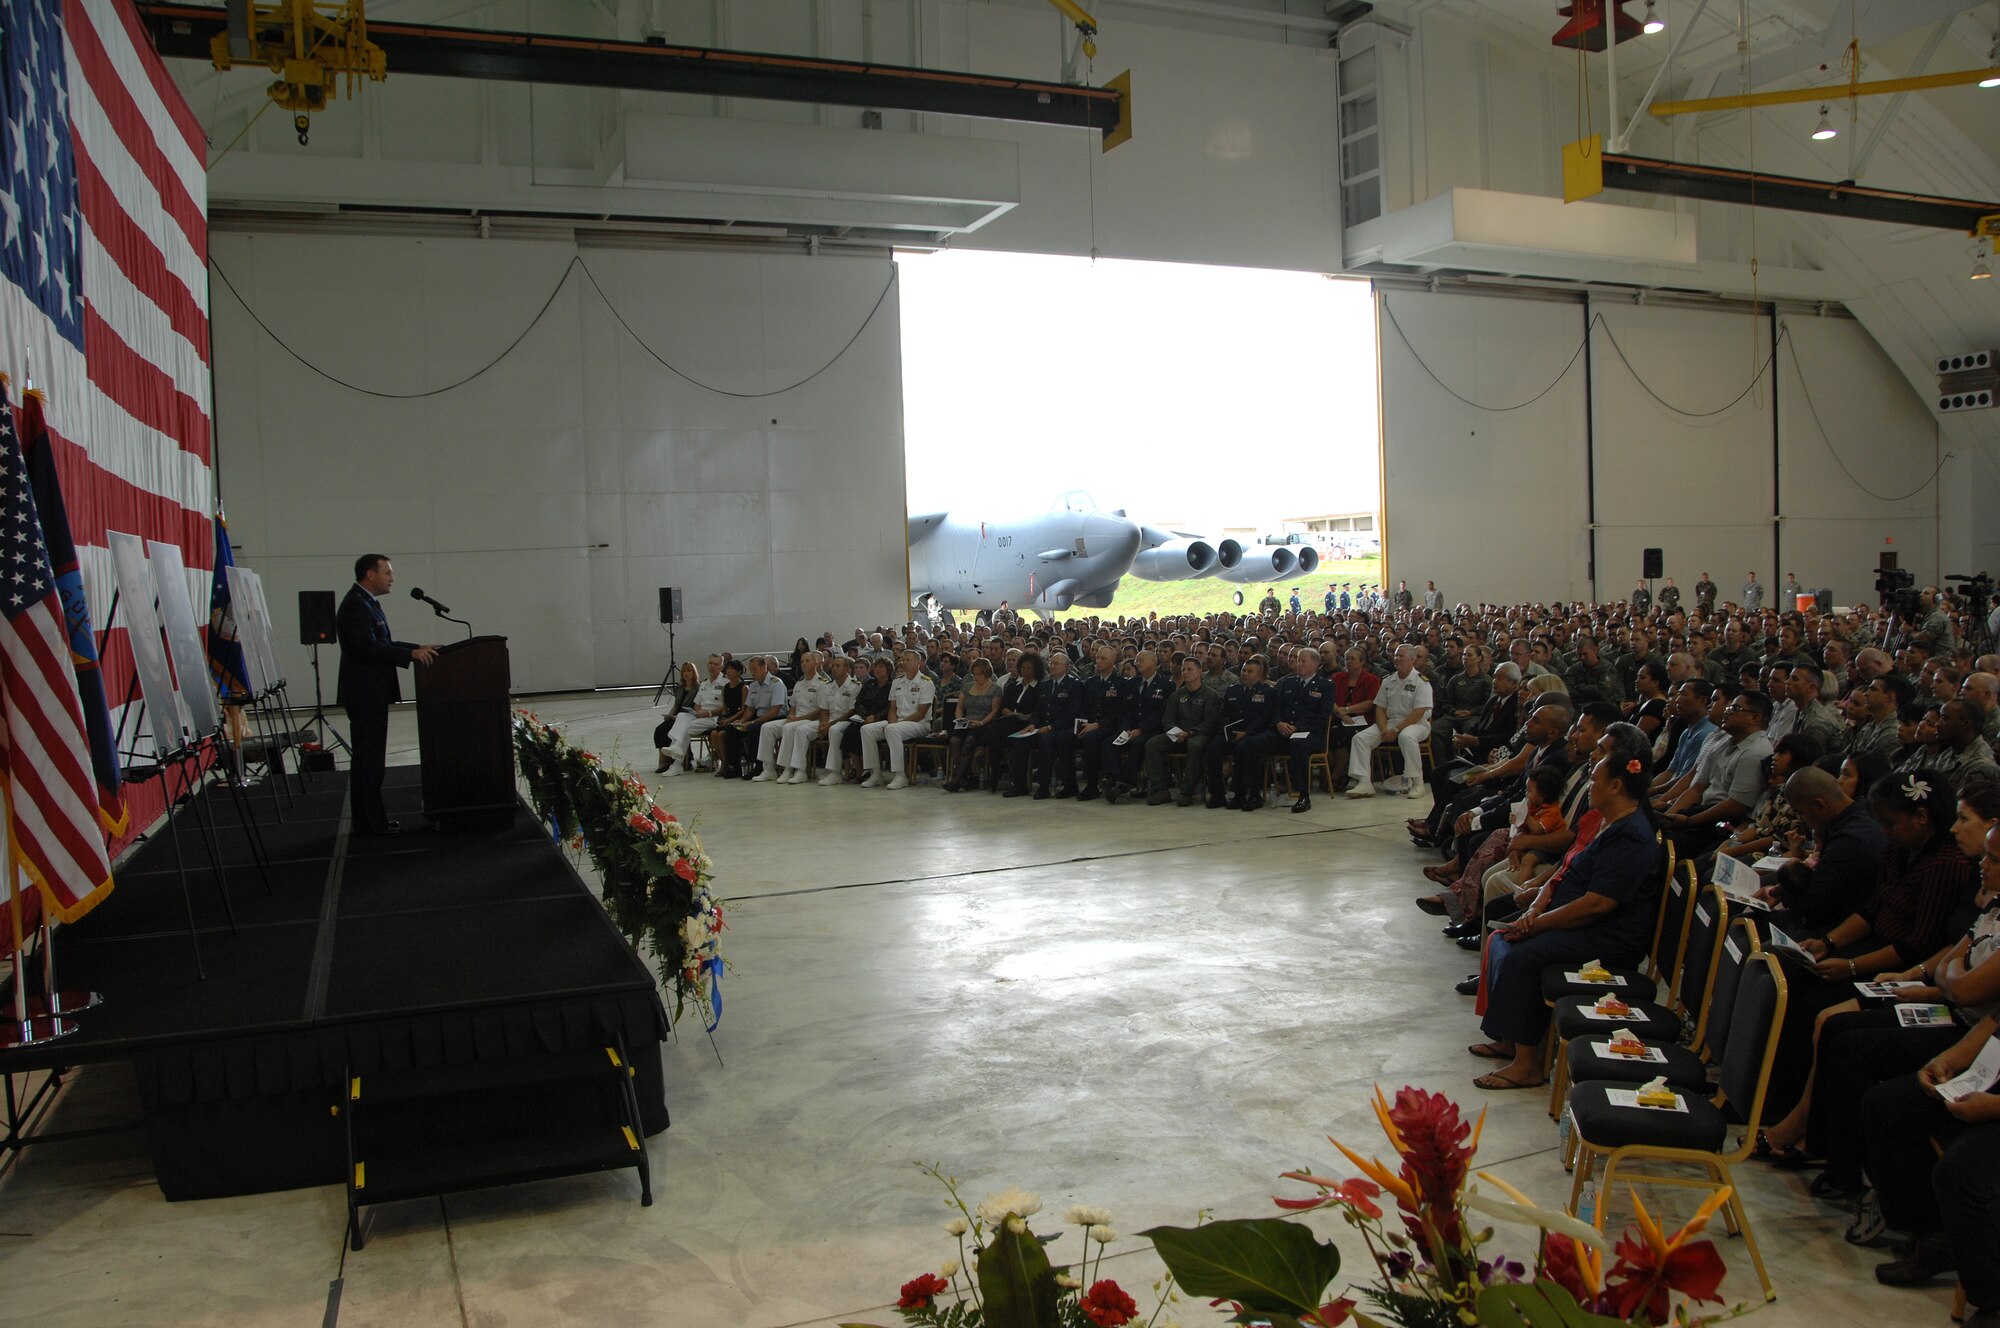 ANDERSEN AIR FORCE BASE, Guam - Brig. Gen. Doug Owens, 36th Wing commander, delivers a heartfelt message to more than 1,800 guests who attended a memorial ceremony Friday at Andersen’s Hangar One.  The ceremony honored the six Airmen who died when their B-52 crashed Monday 25 miles off the coast of Guam.  Their mission was to fly over Guam’s Liberation Day parade celebrating the island’s liberation from Japanese occupation in World War II. (U.S. Air Force photo by Airman 1st Class Courtney Witt)
